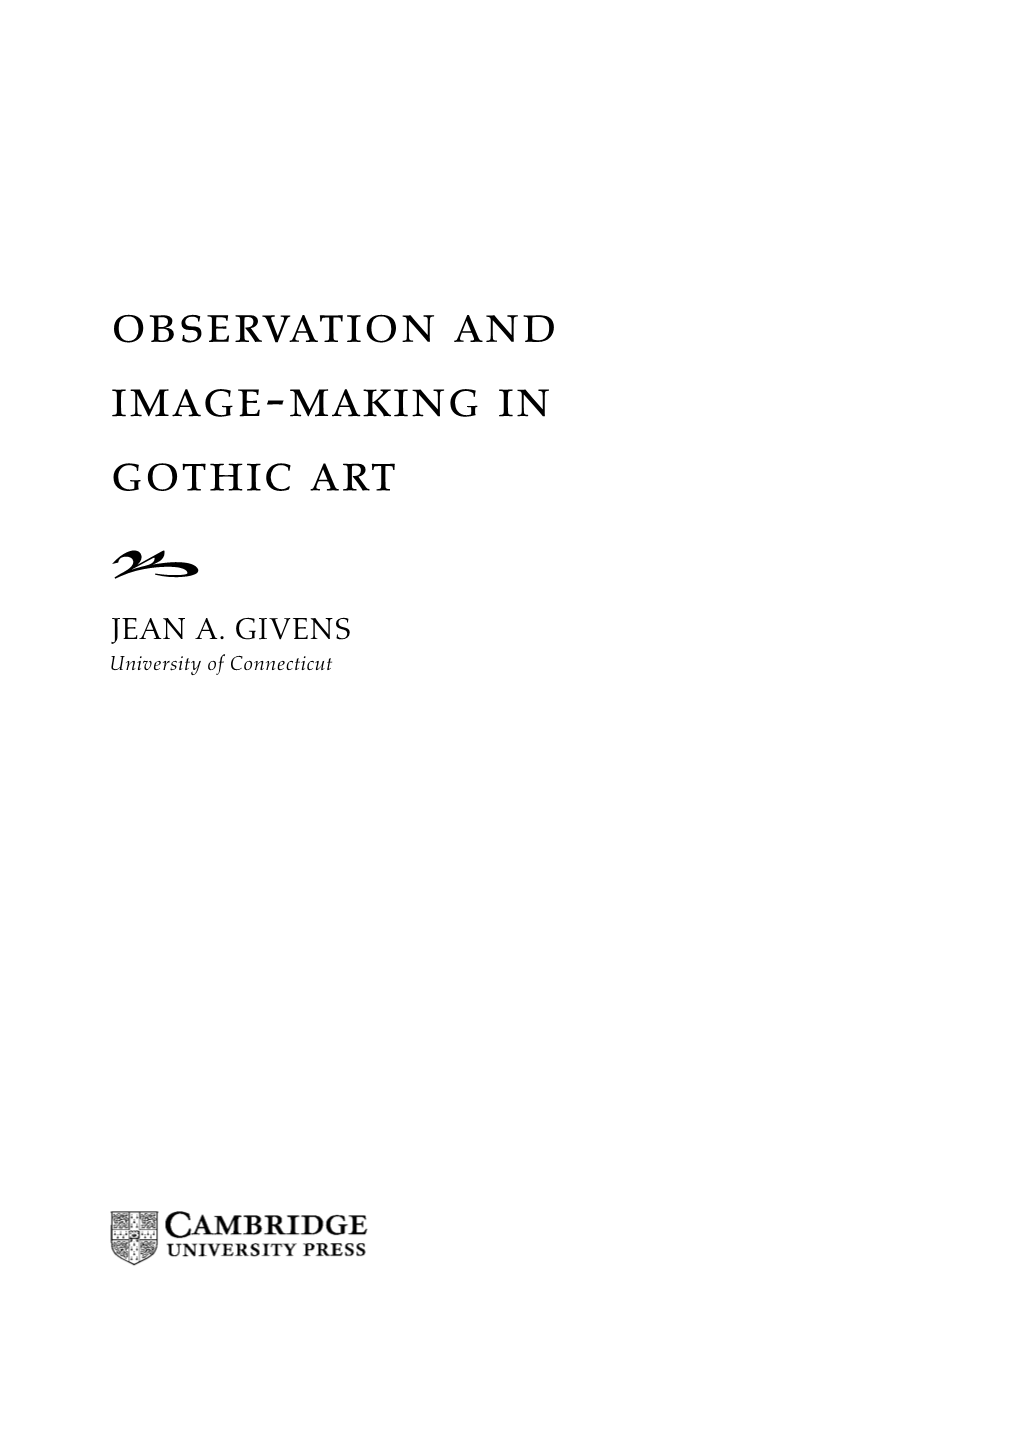 Observation and Image-Making in Gothic Art � JEAN A